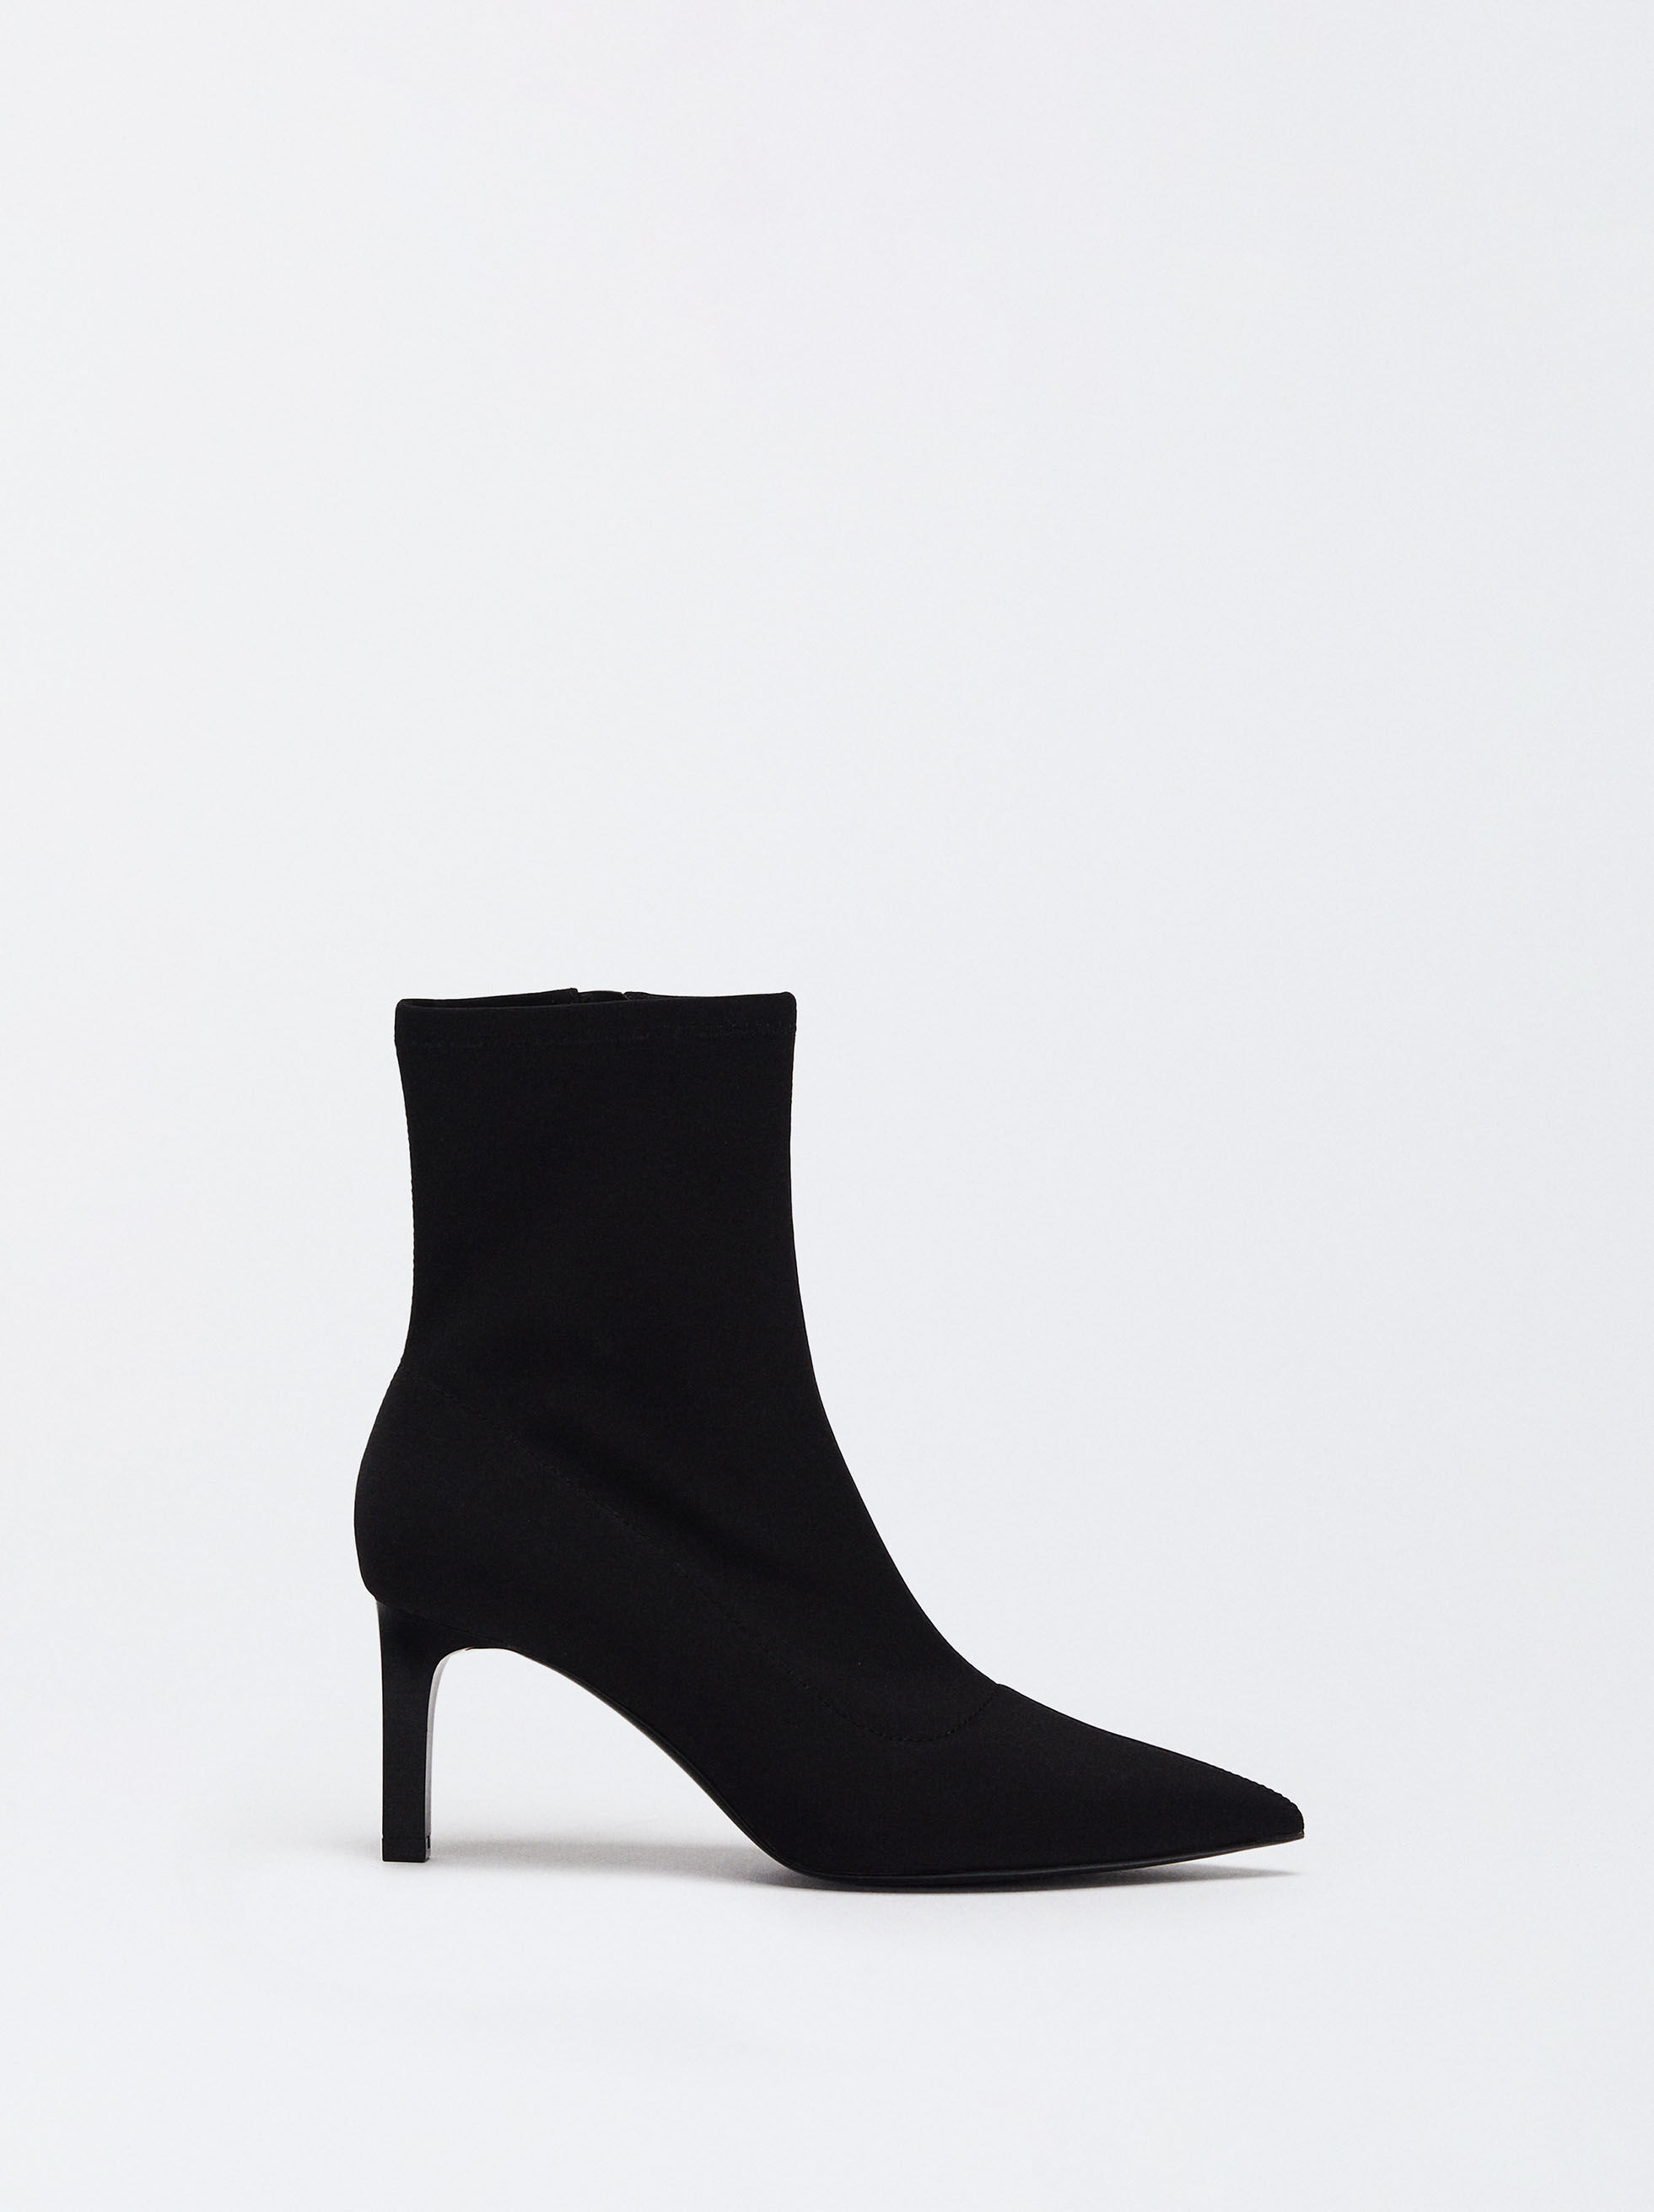 ZARA Fabric Ankle Boots with Metallic Heel, Women's Fashion, Footwear, Boots  on Carousell